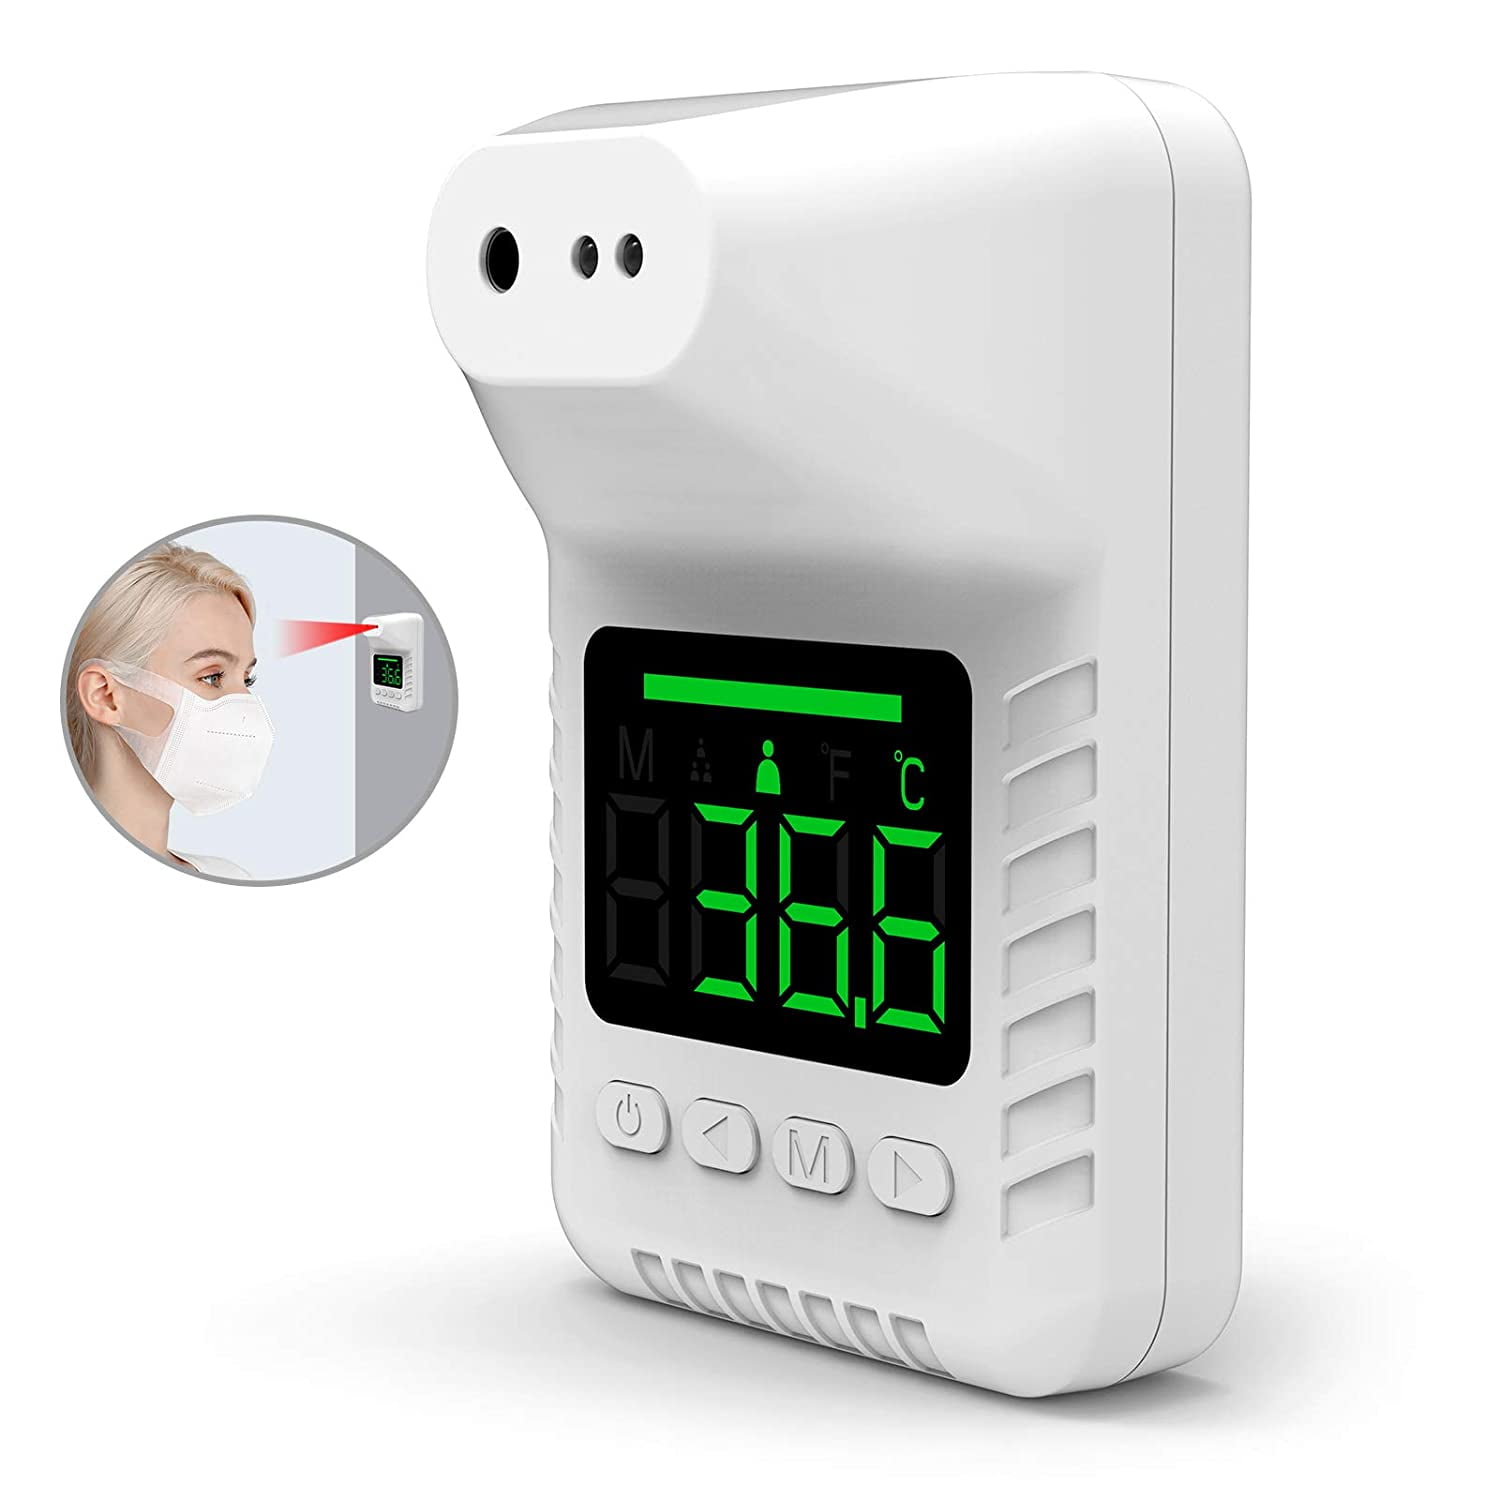 Ylight Infrared Digital Body Thermometer 0.5S Quick Test Infrared Wall-Mounted Forehead Thermometer with Fever Alarm/LCD Display 